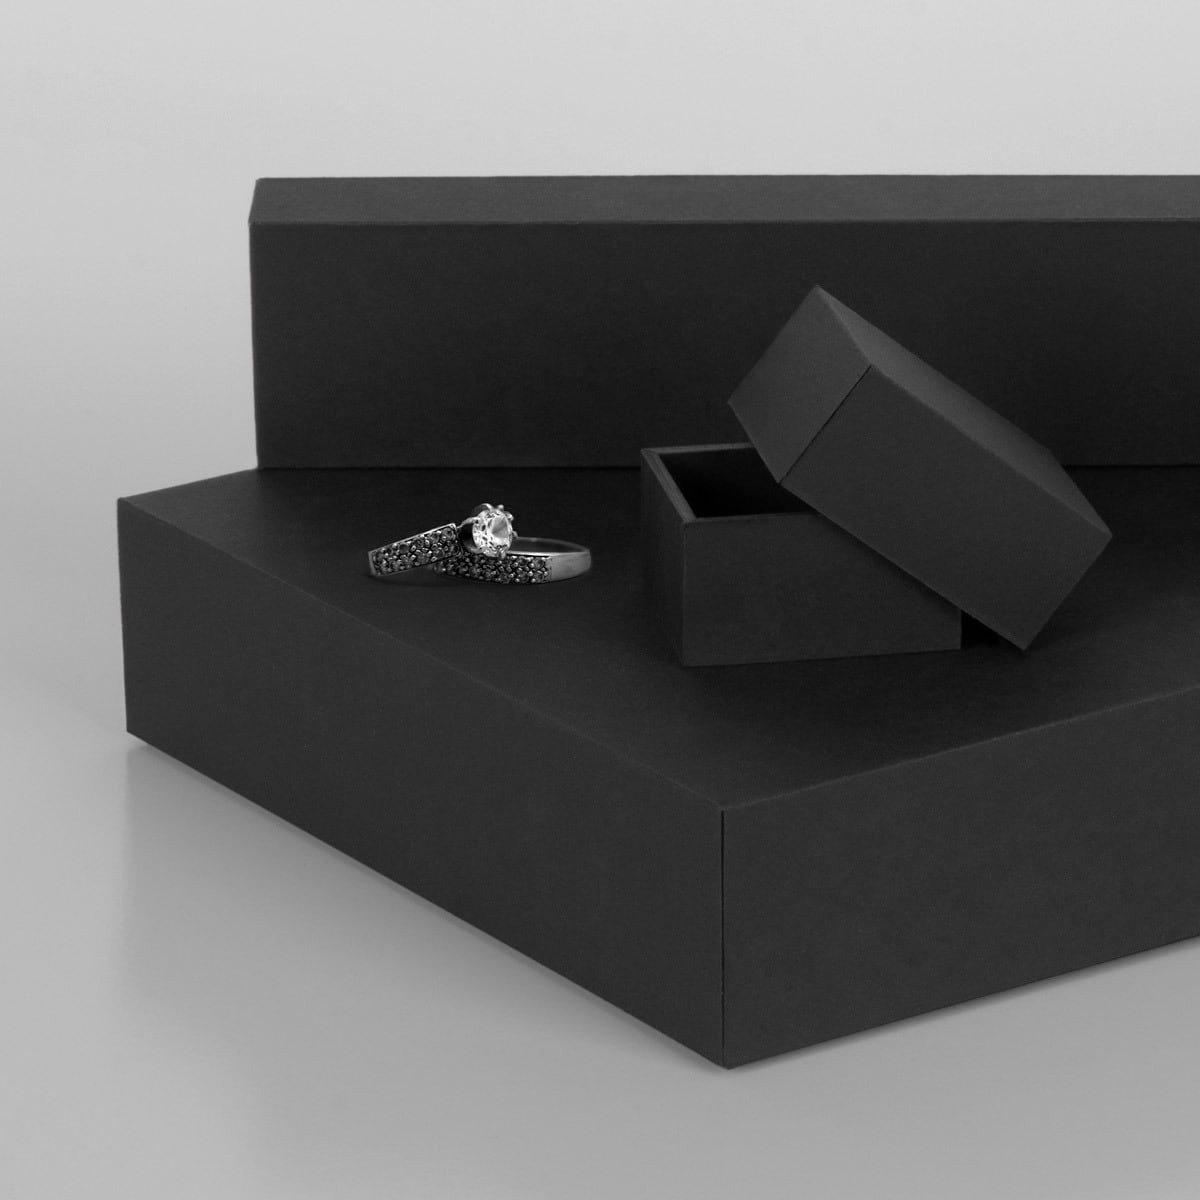 Product packaging jewellery box made of KROMA All Black